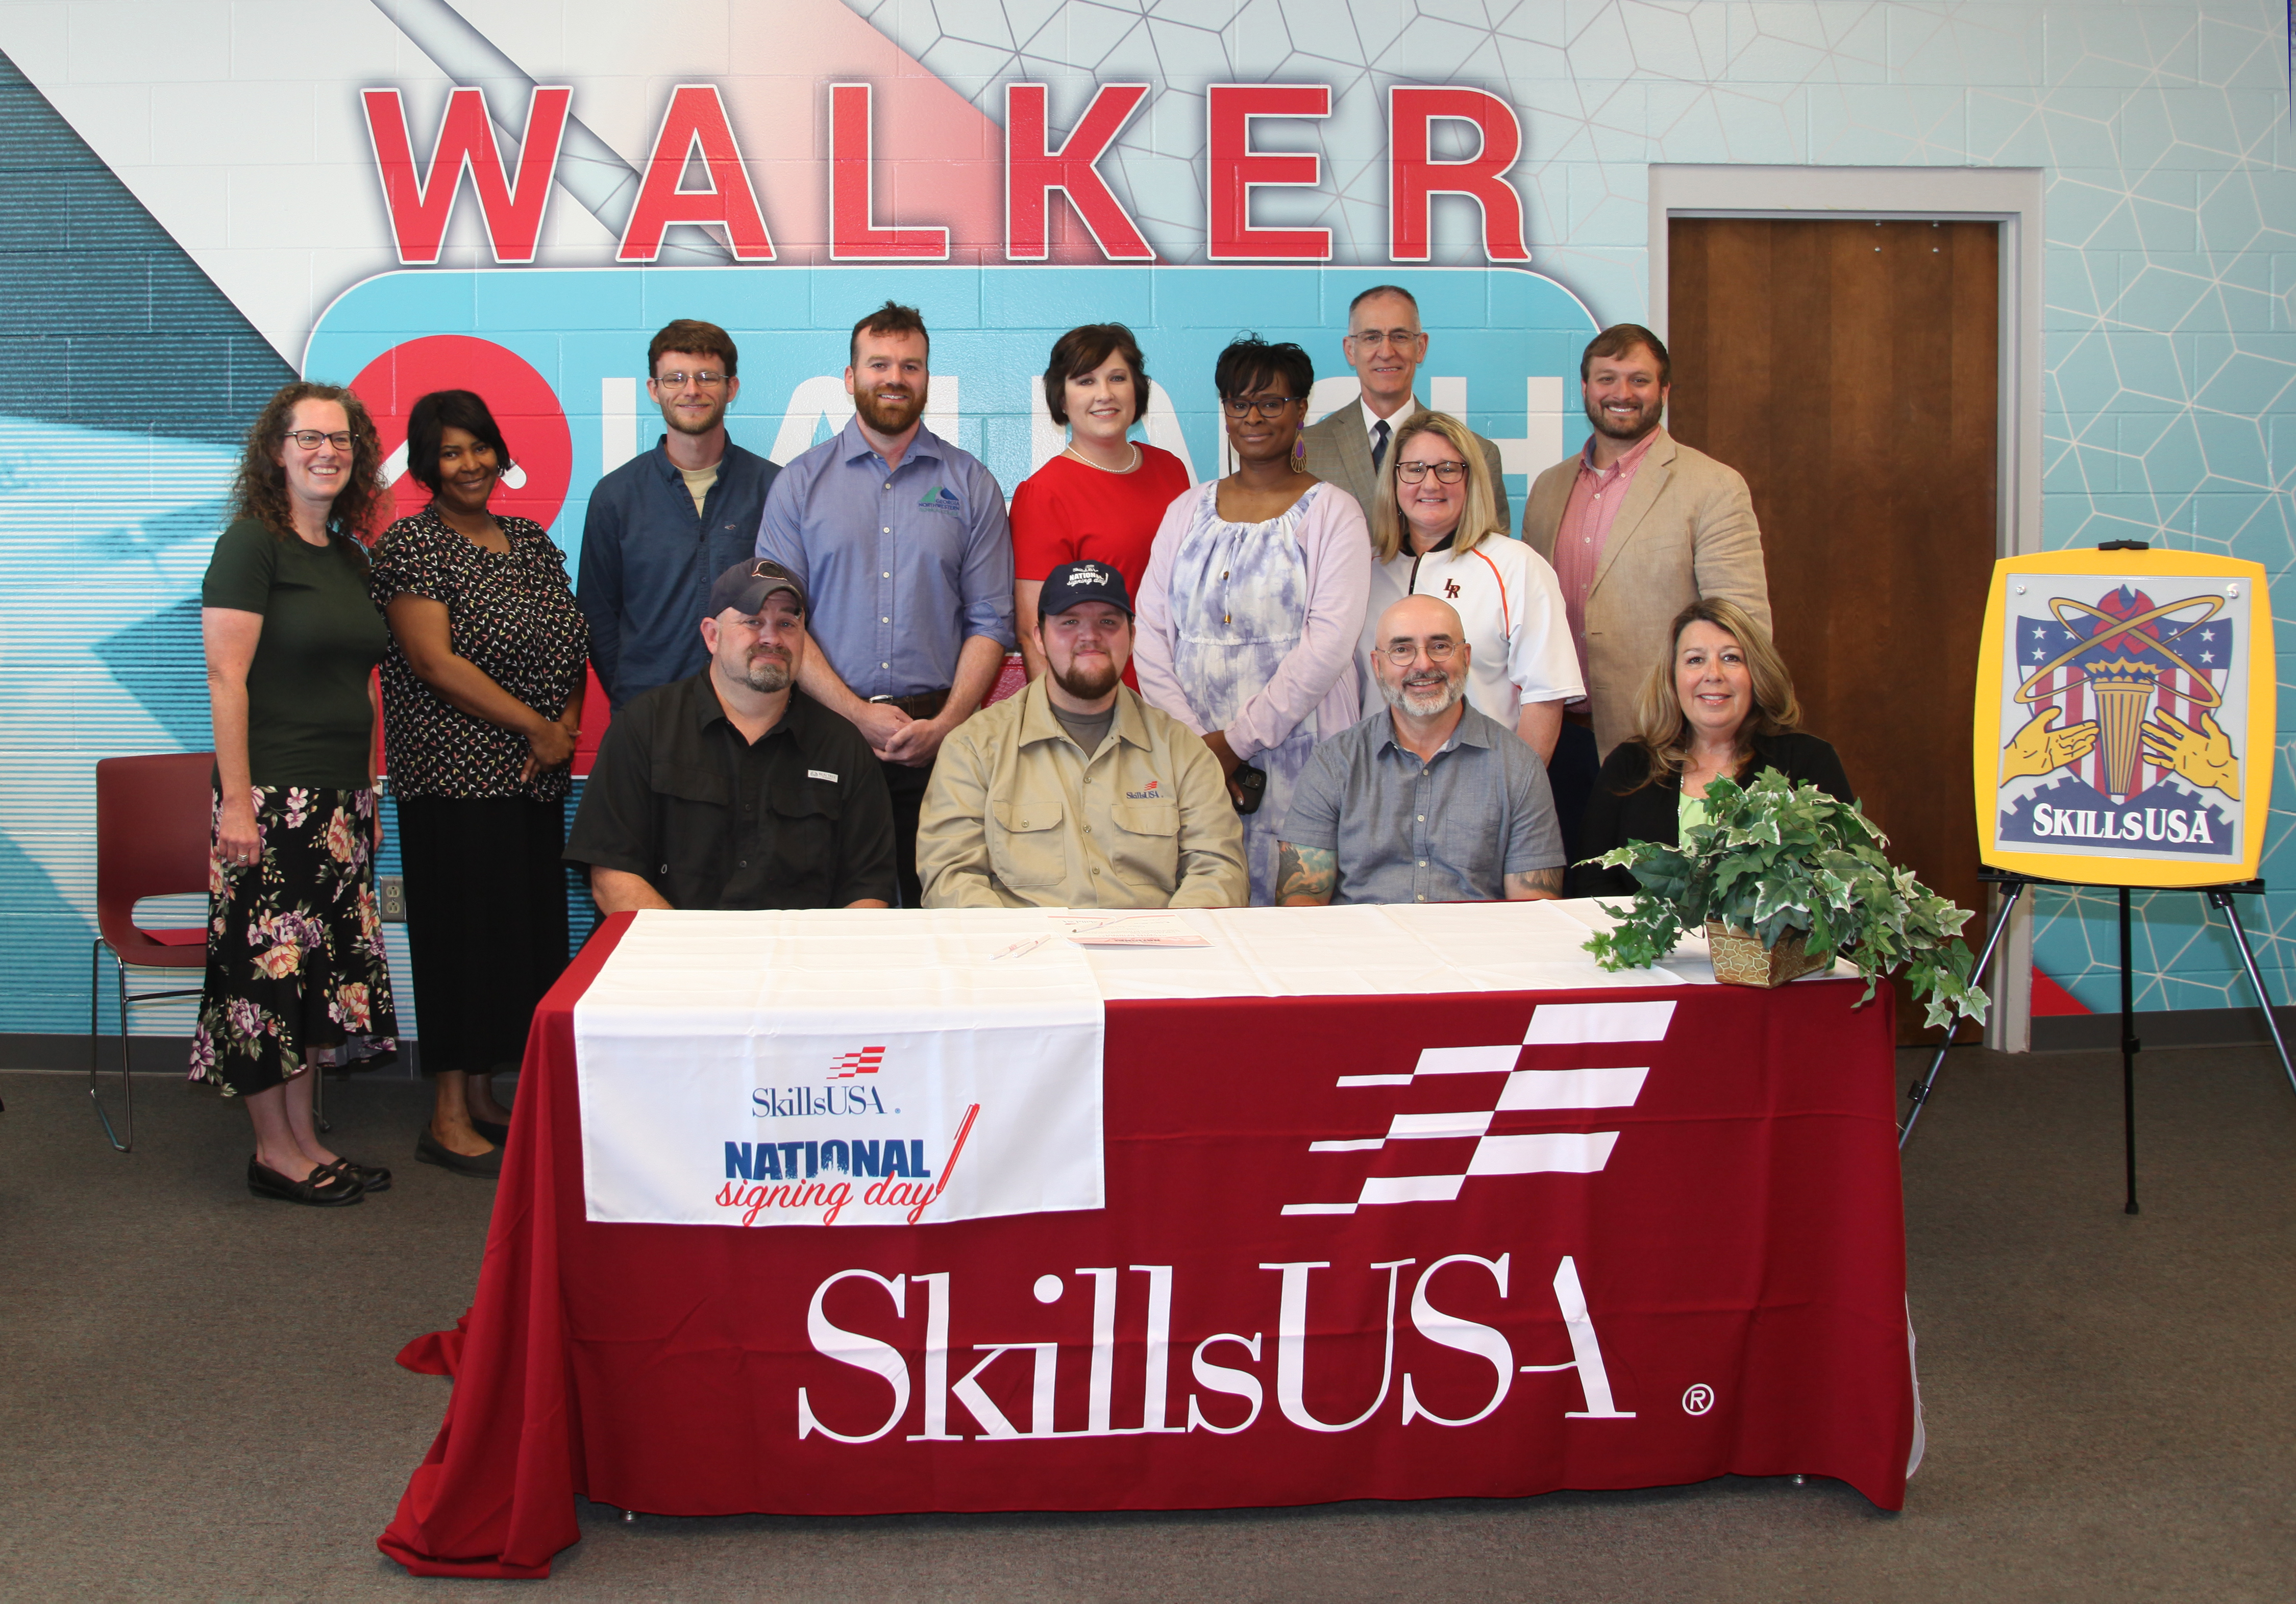 Garrett Rollins (seated, second from left) is surrounded by those who attended his SkillsUSA National Signing Day ceremony, May 5, at GNTC’s Walker County Campus. Also pictured (from left, seated) are his father, Donny Rollins; Mark Collins, Metro Boiler Tube; and Teresa Phillips, Metro Boiler Tube; (from left, standing) Julie Portwood, coordinator of Secondary Instruction and Walker LAUNCH, Walker County Schools;  Deidrienne Gross, Walker LAUNCH instructor; Tayler Davidson, instructor of Welding and Joining Technology, GNTC; Jeremiah Cooper, program director and instructor of Welding and Joining Technology, GNTC; Sarah Jenkins, SkillsUSA advisor; Lugenia Suttles, assistant principal, LaFayette High School; Damon Raines, superintendent, Walker County Schools; Maggie Stultz, principal, LaFayette High School; and Justin Carruth, coordinator of Secondary Curriculum and Career, Technical and Agricultural Education, Walker County Schools.